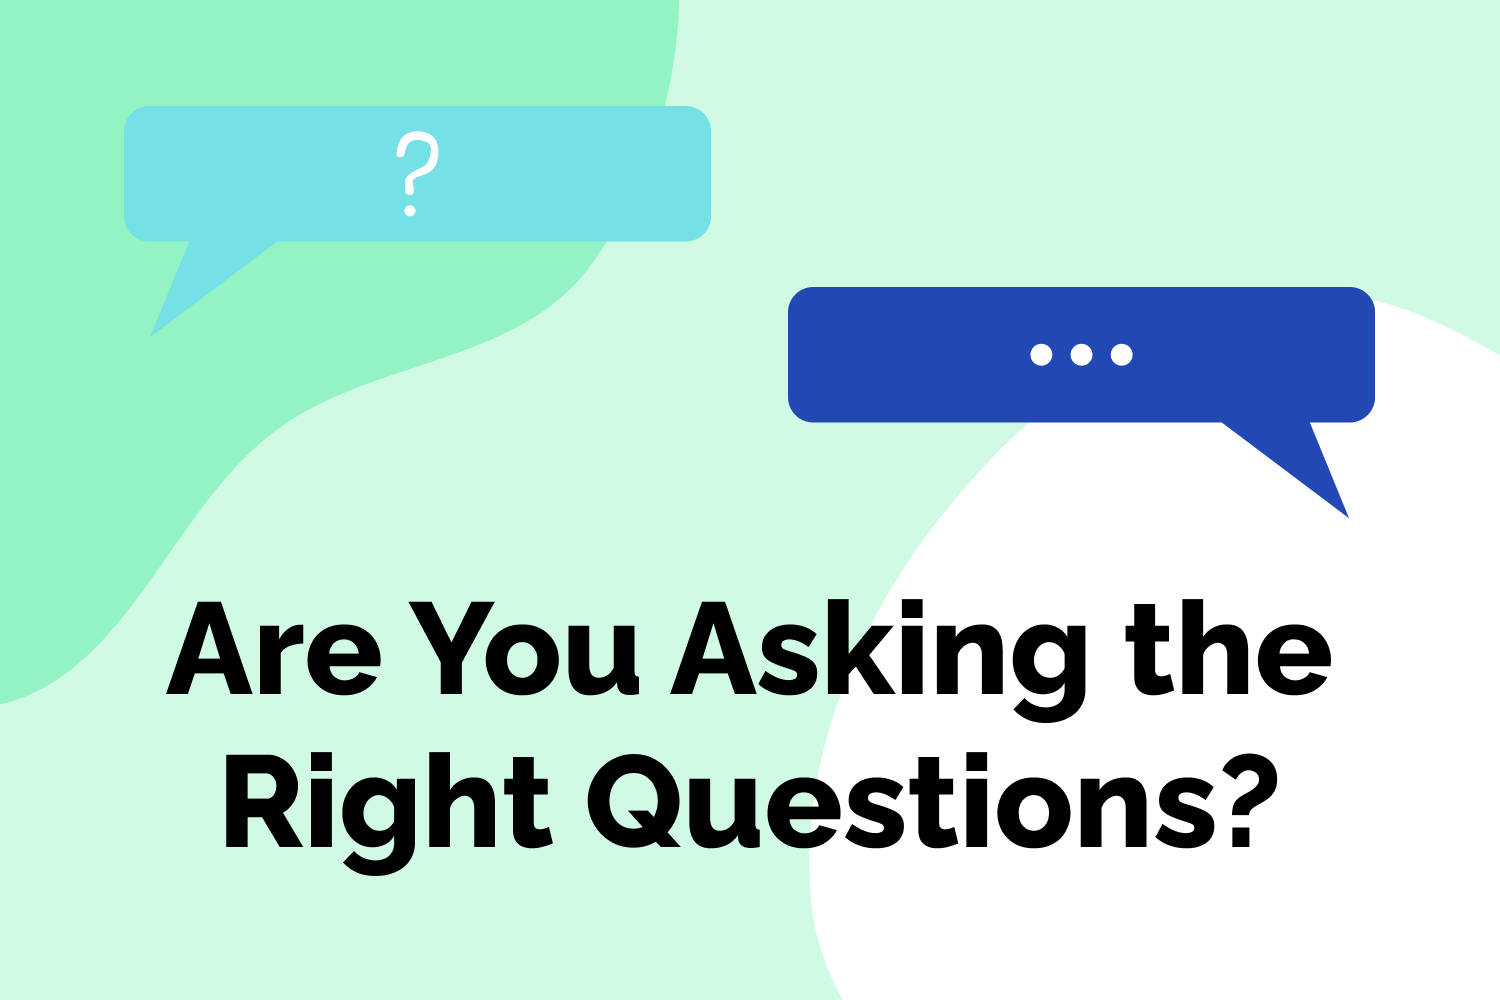 Are You Asking the Right Questions?